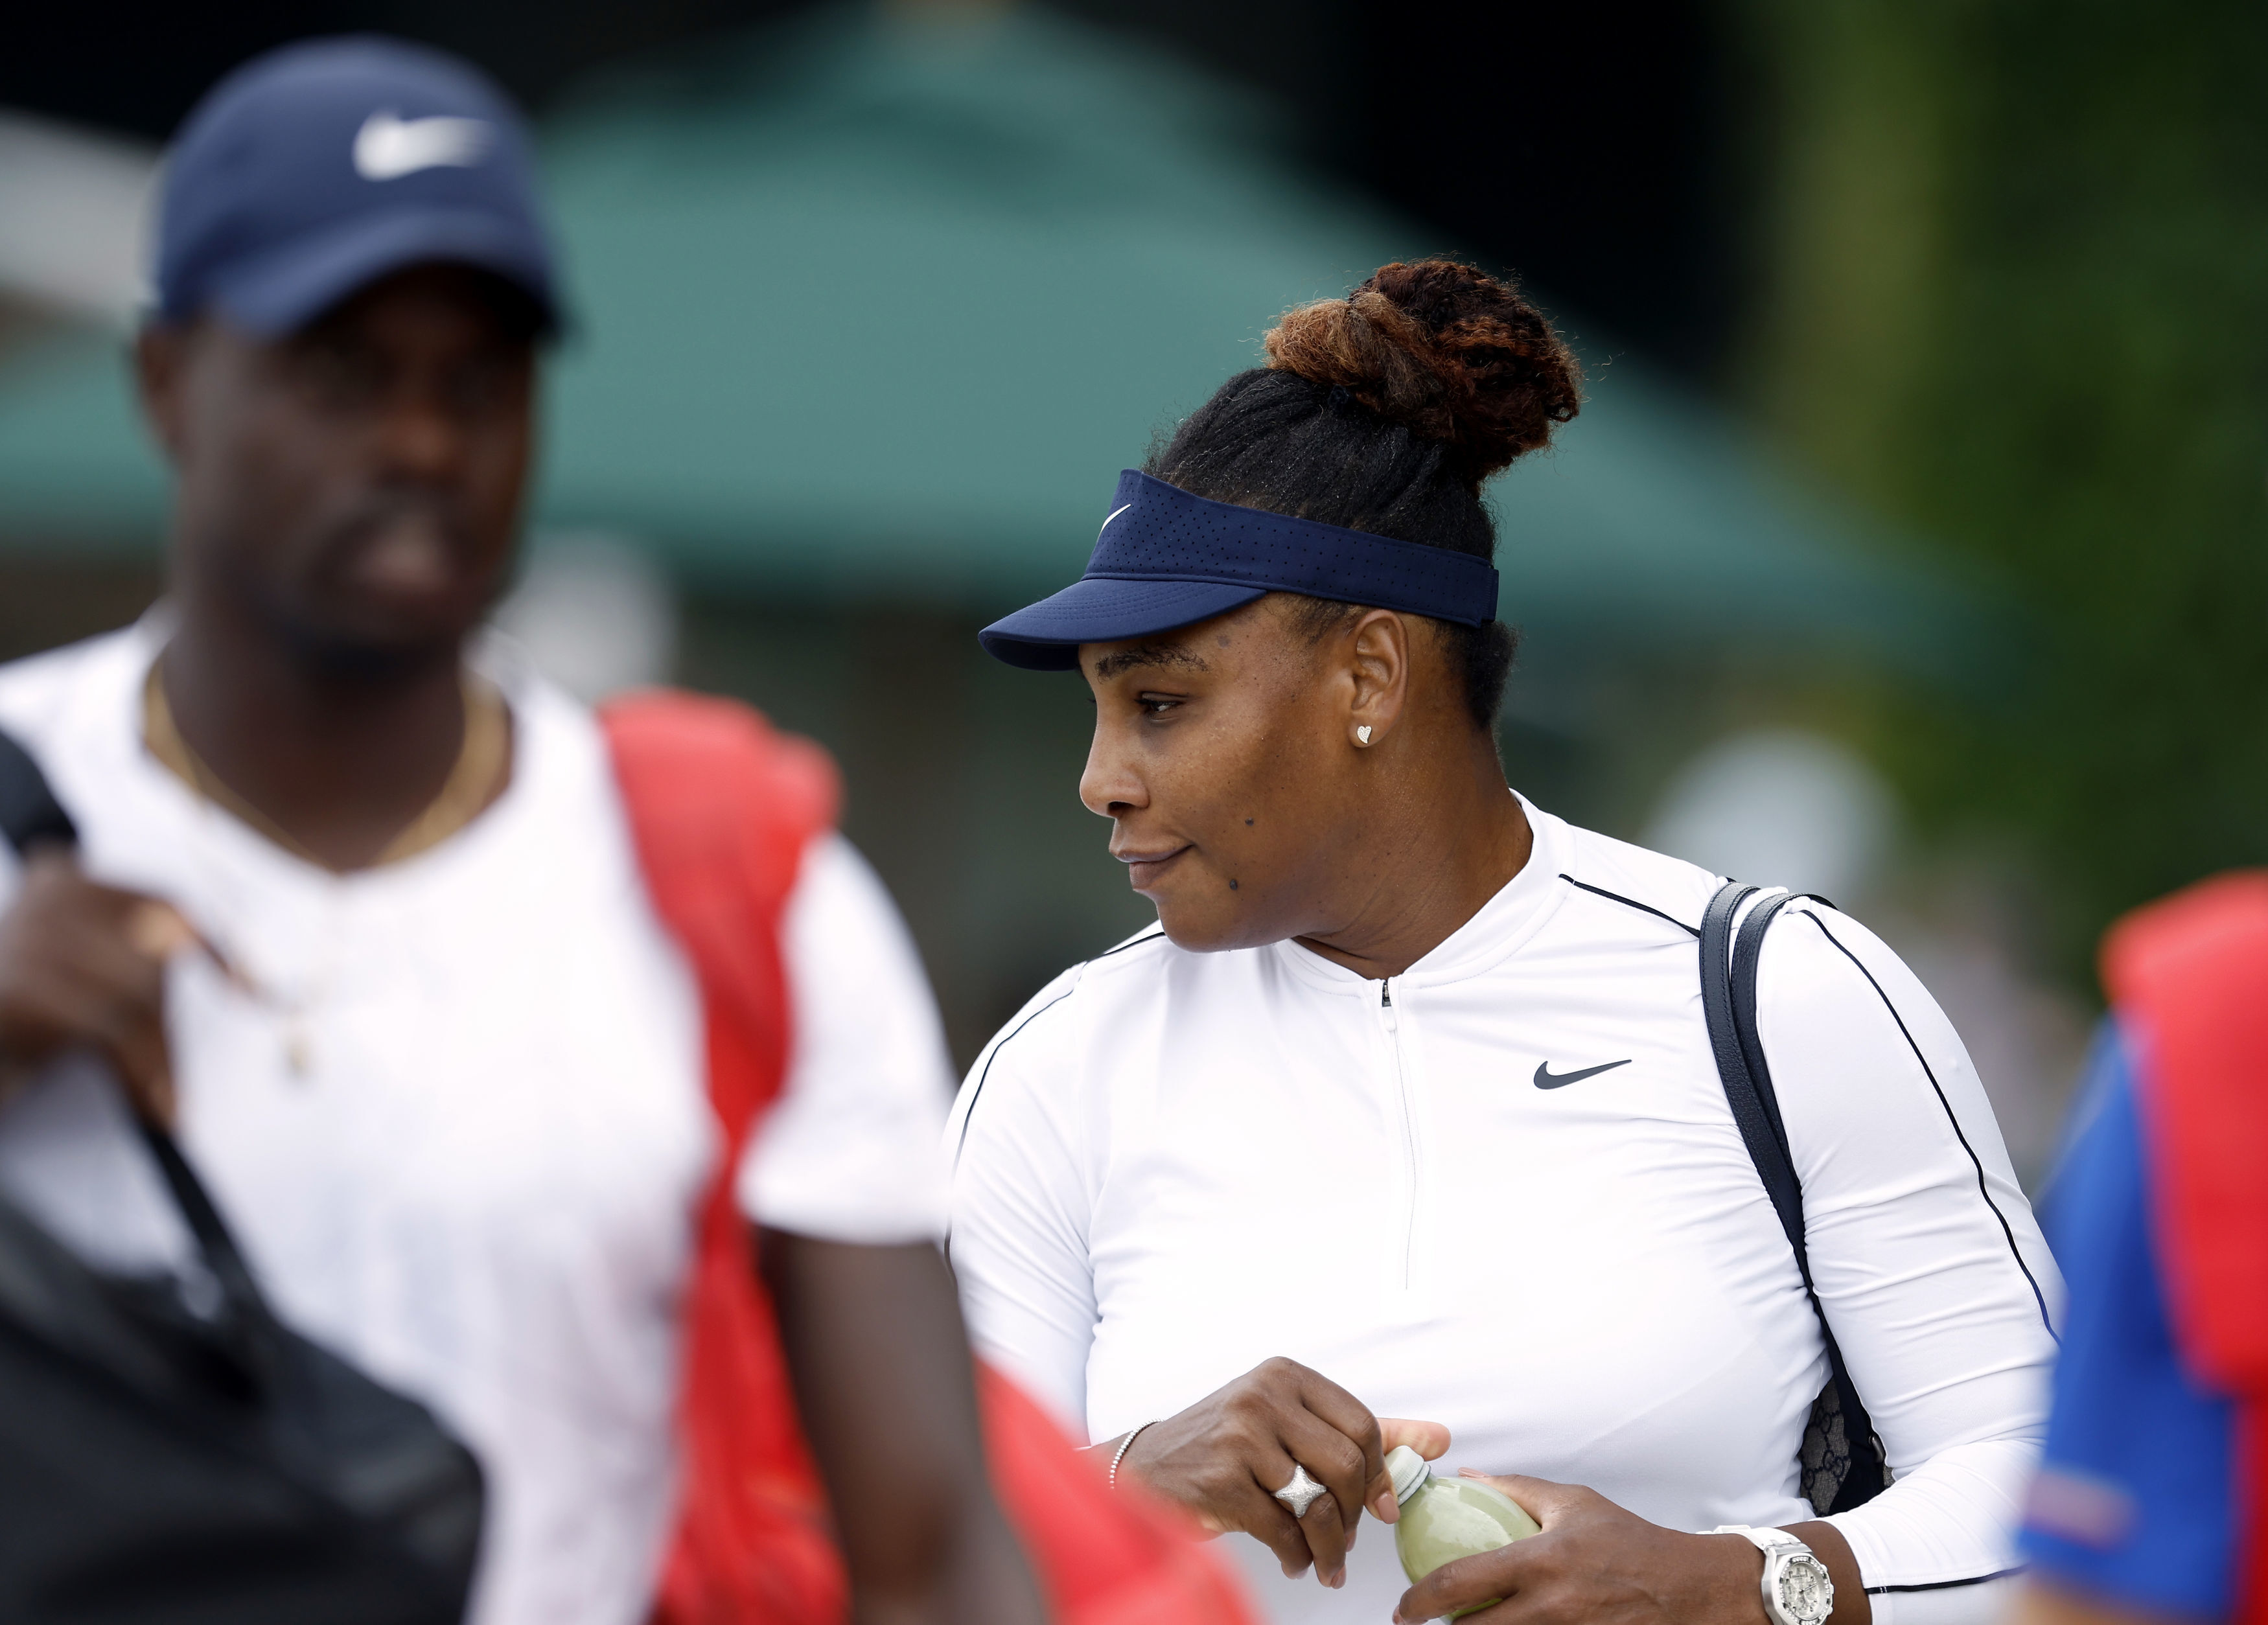 Wimbledon 2022 Serena Williams to Face 113th-ranked Foe in Comeback Debut 